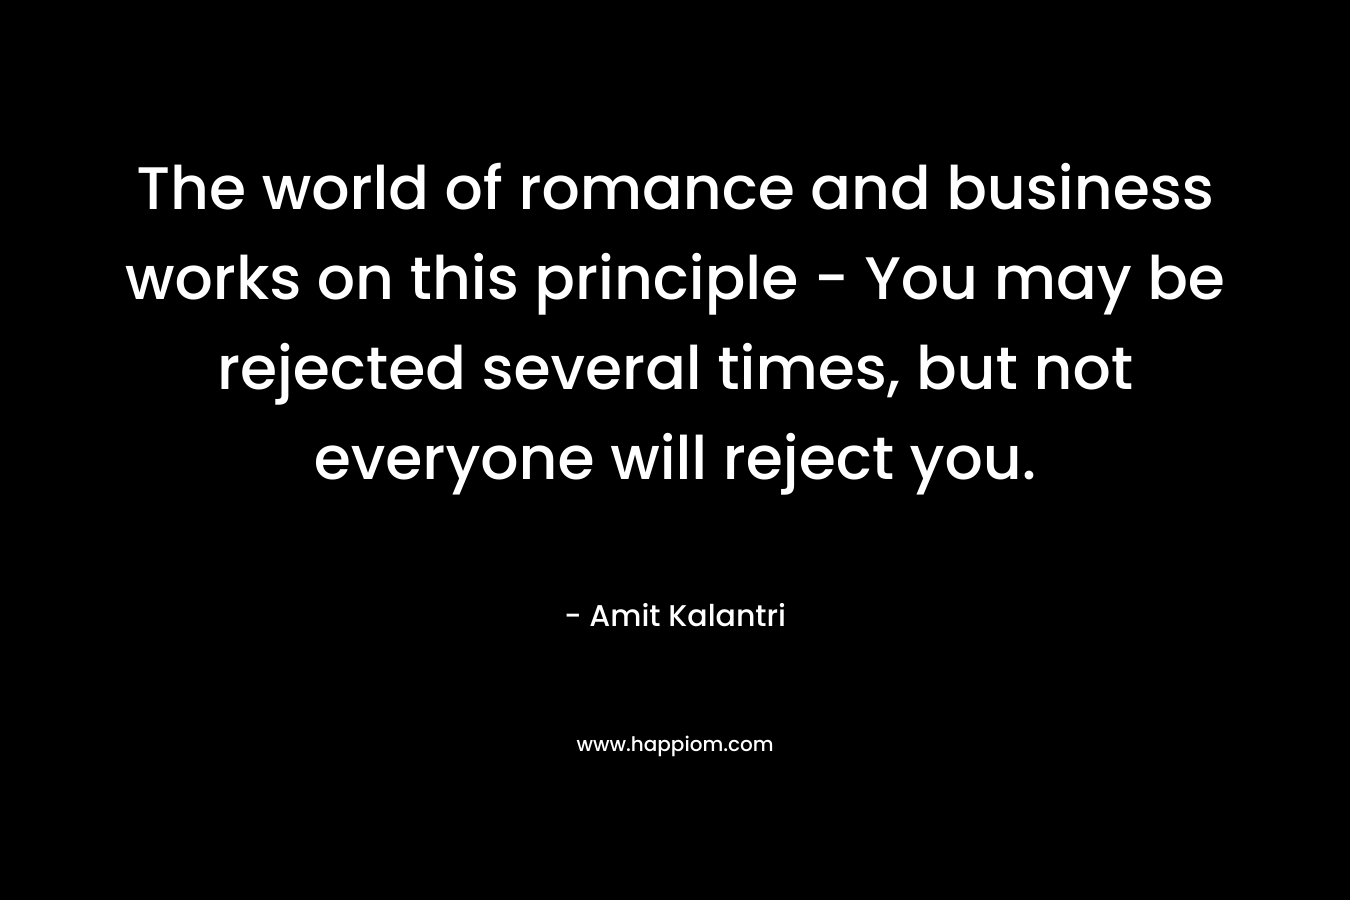 The world of romance and business works on this principle - You may be rejected several times, but not everyone will reject you.